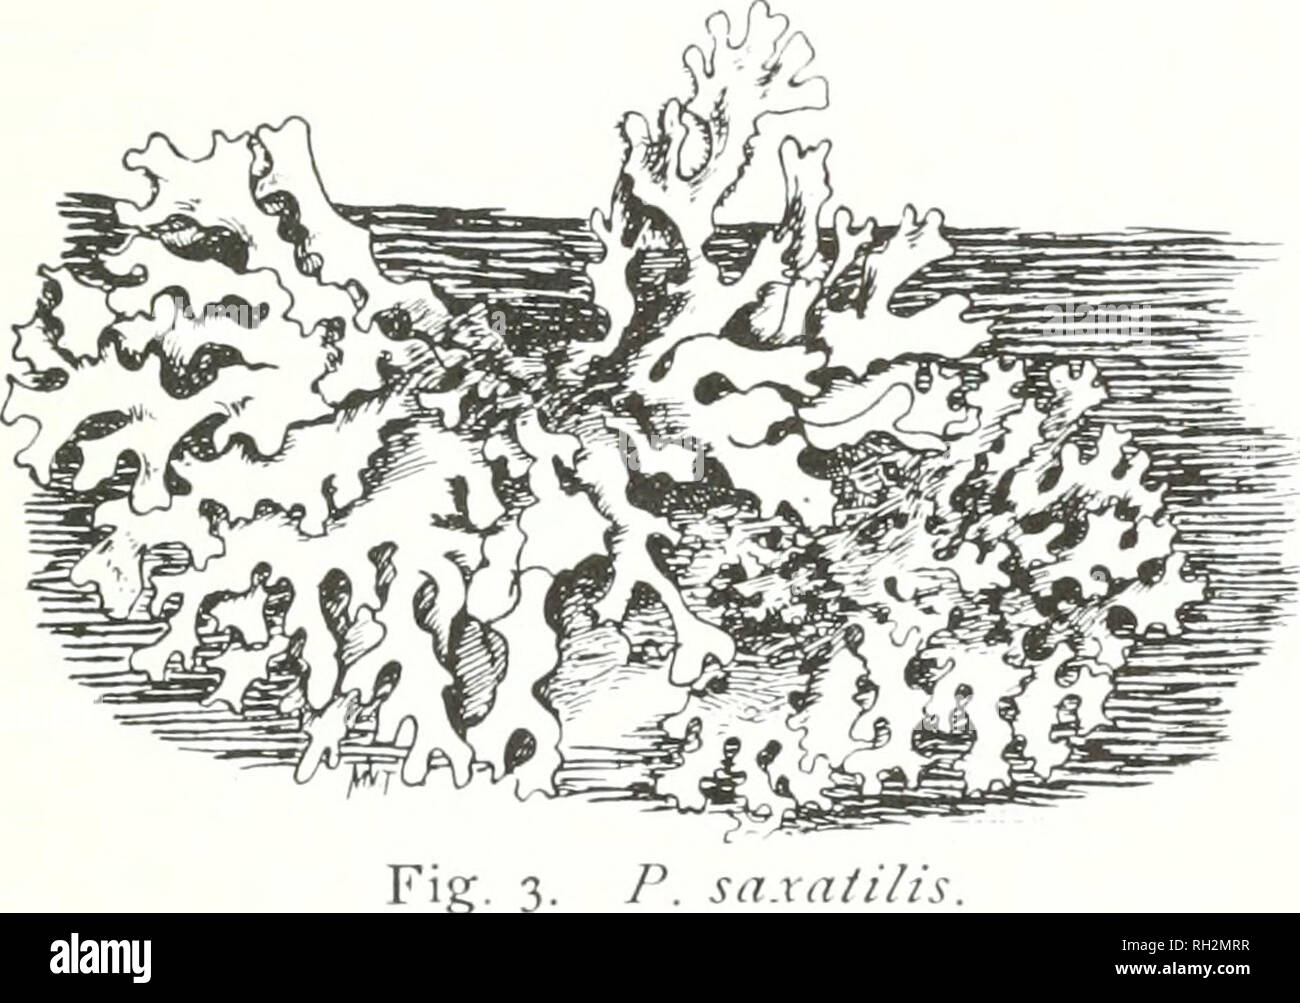 . The Bryologist. Bryology; Bryology -- Periodicals. Fig. 2. P. tiliacea. Parmelia tiliacea (Hoffm.) Floerk. (Fig. 2.) This pretty lichen grows on rocks, trees, and dead wood; it adheres closely to the substratum. The lobes are narrow and round, quite smooth. Glaucescent in color usually, but sometimes a light gray. Beneath it is black and densely covered with black fibrils. Apothecia are fre- quent, medium in size. The disk is dark brown with a reddish tinge, the margin is crenulate. Parmelia Borkeri Turn. While this is not an uncommon species it is not so generally found as the variety rtaie Stock Photo